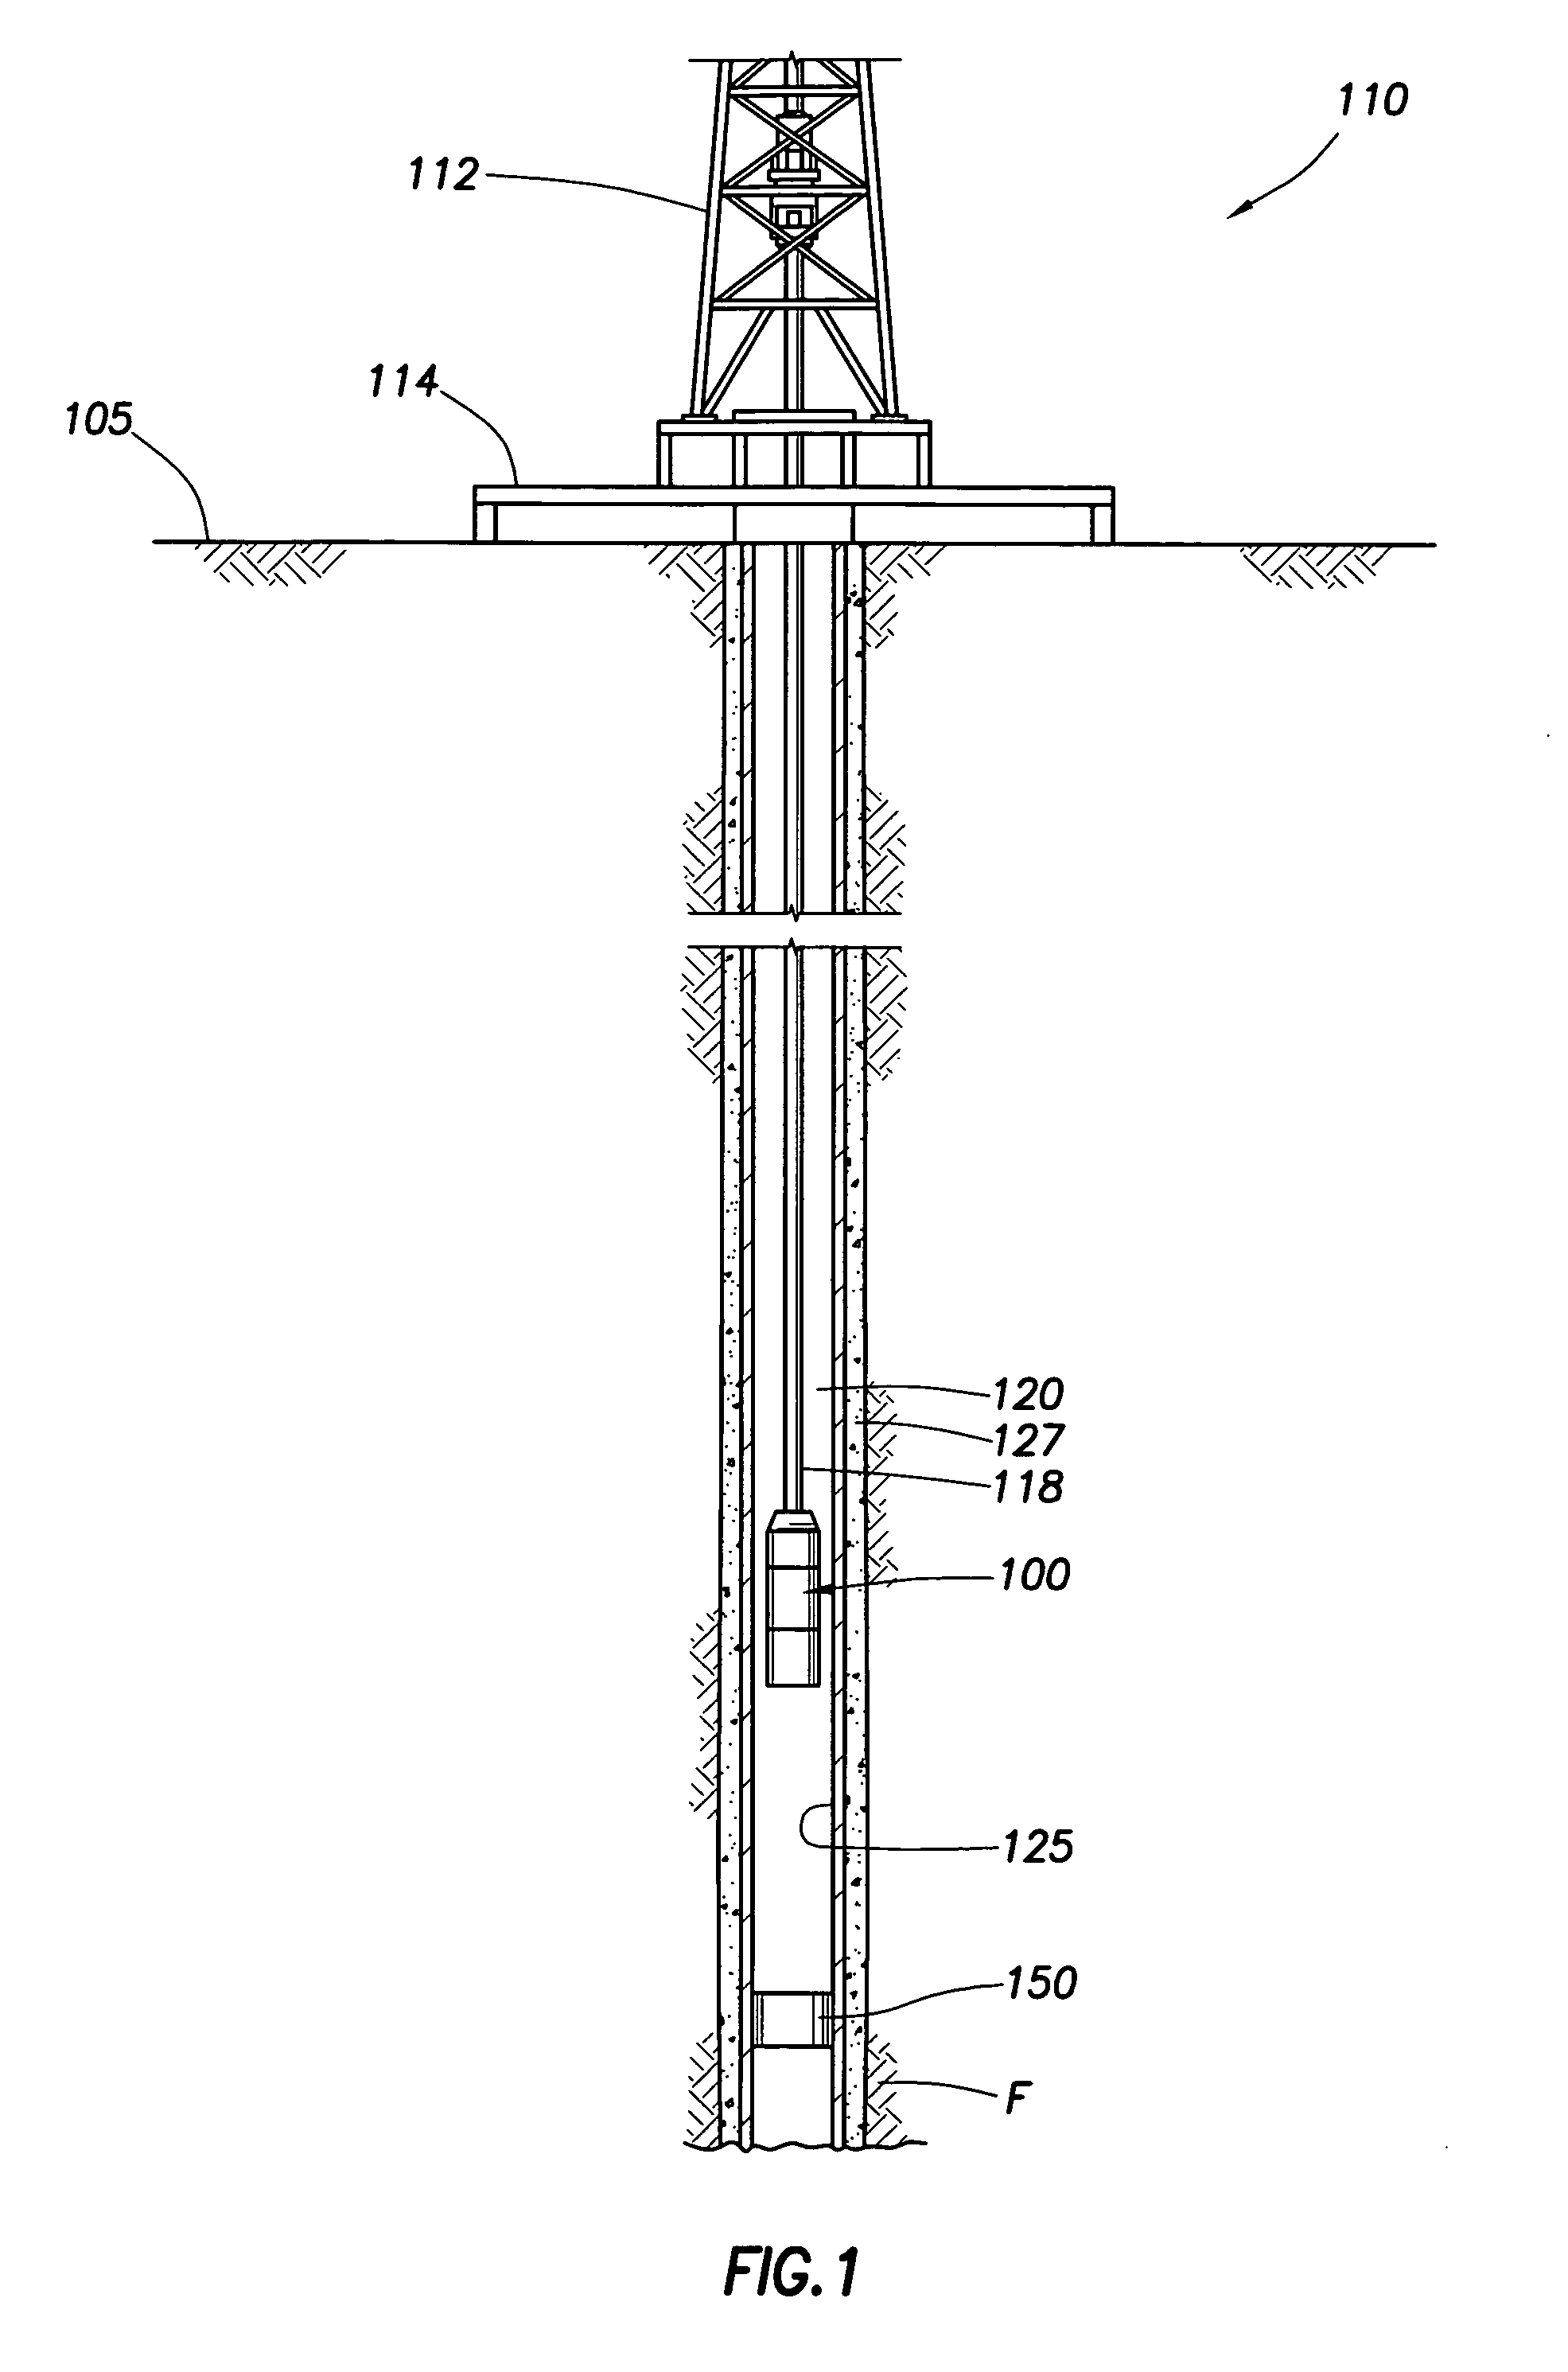 Self-activating downhole tool